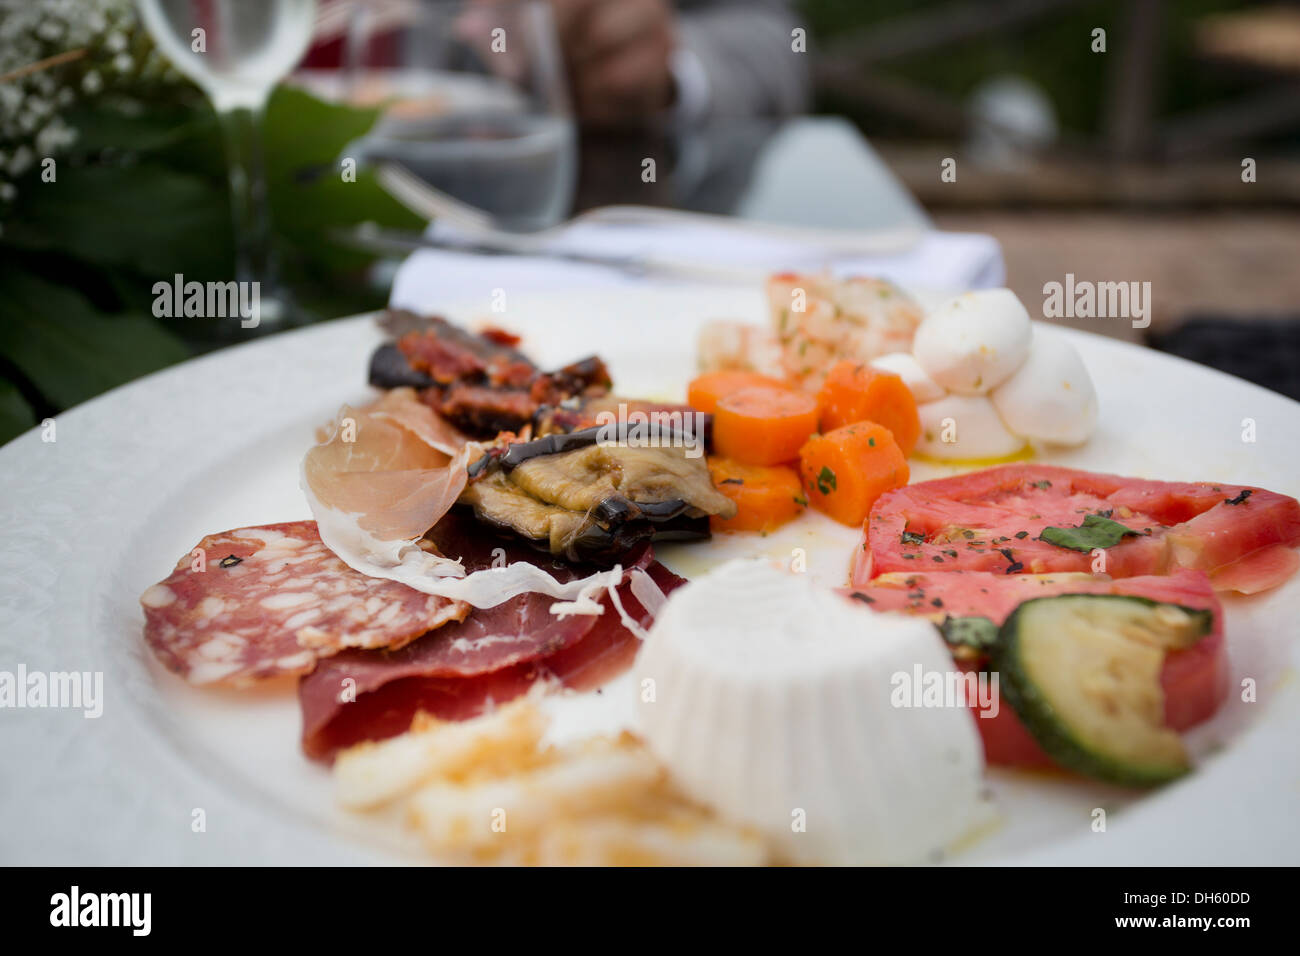 sausages, meats and cheeses from italy in a typical starter dish Stock Photo